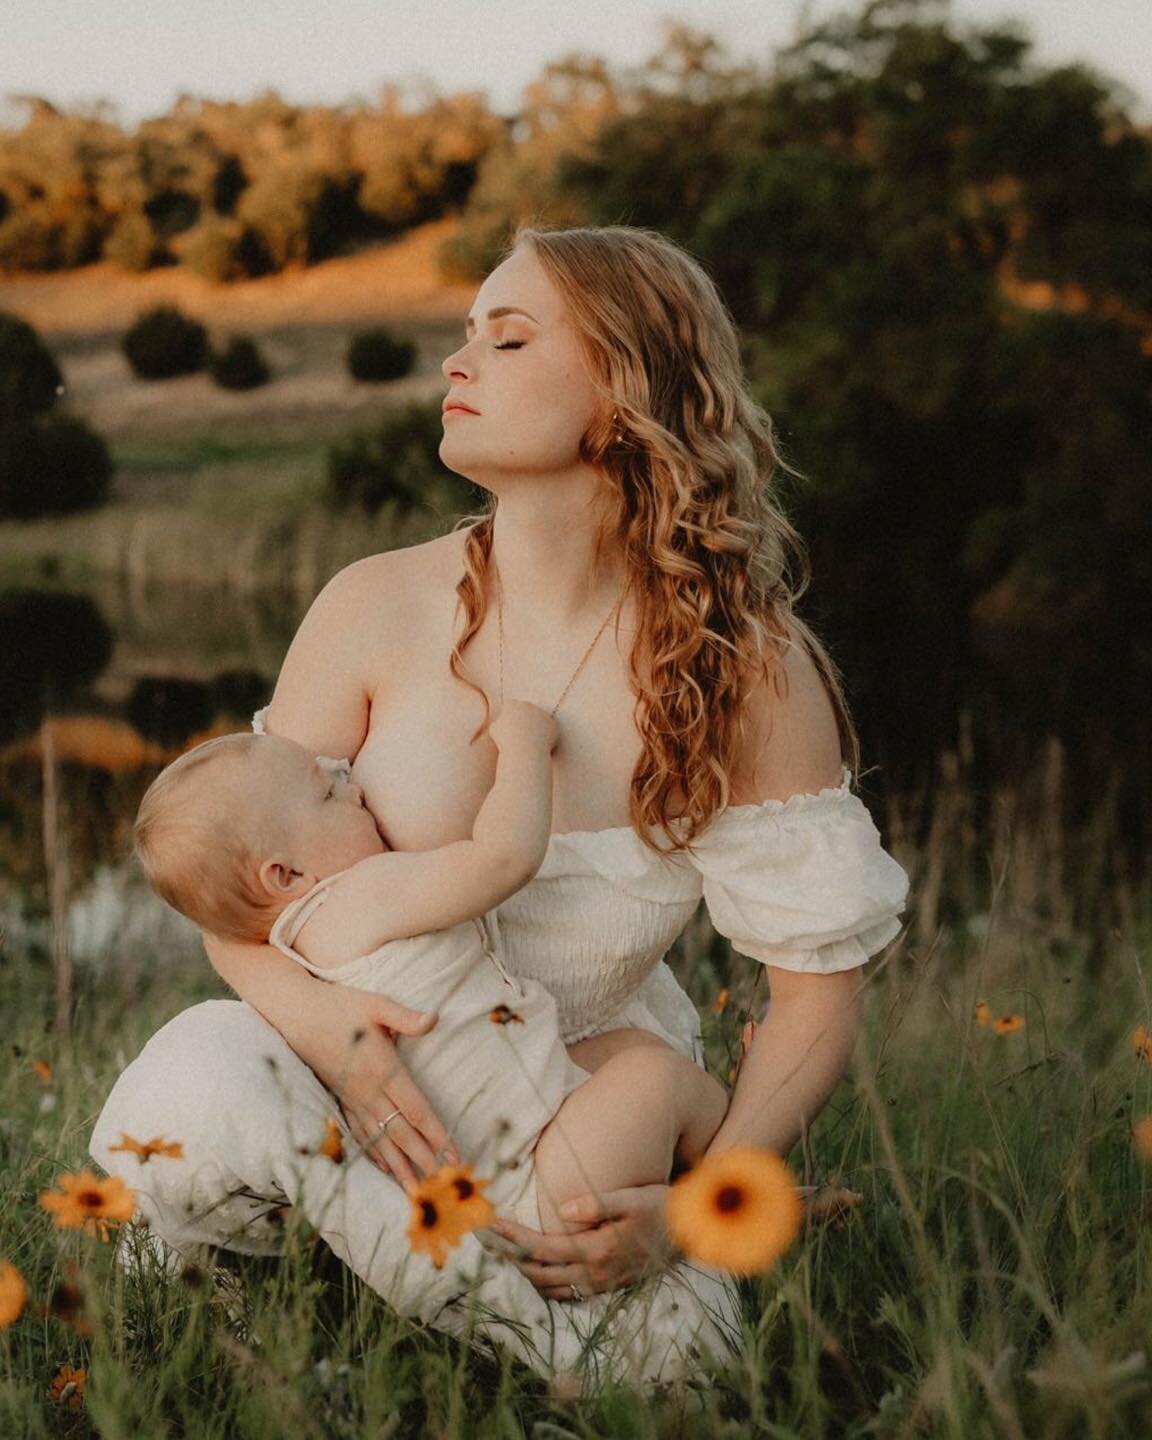 I&rsquo;m slow on Instagram, that&rsquo;s why I never shared these from the summer breastfeeding photo shoot. 

#austinmaternityphotographer #austinnewbornphotographer #austinminisessions #Austinfamilyphotographer #FallMiniSessions #austinphotographe